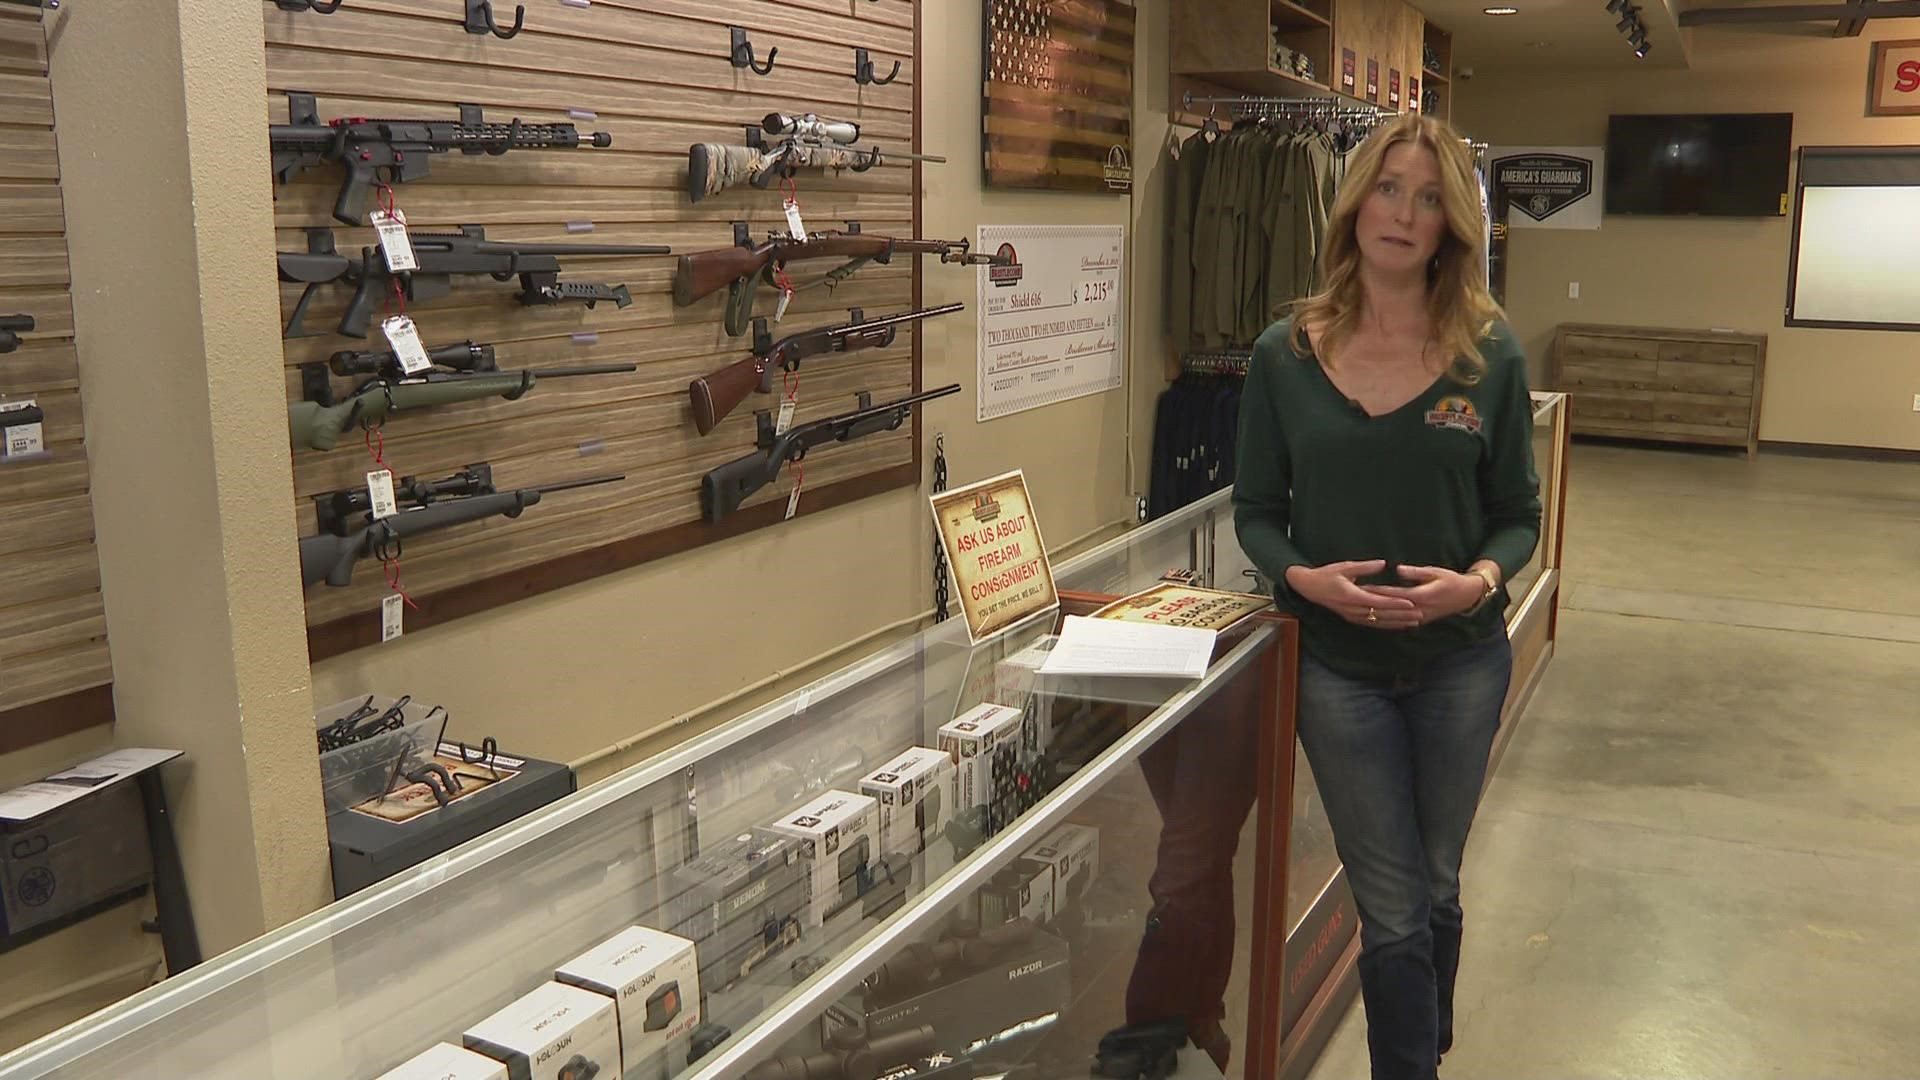 A CU Anschutz study found gun retailers and law enforcement agencies support this violence prevention option.